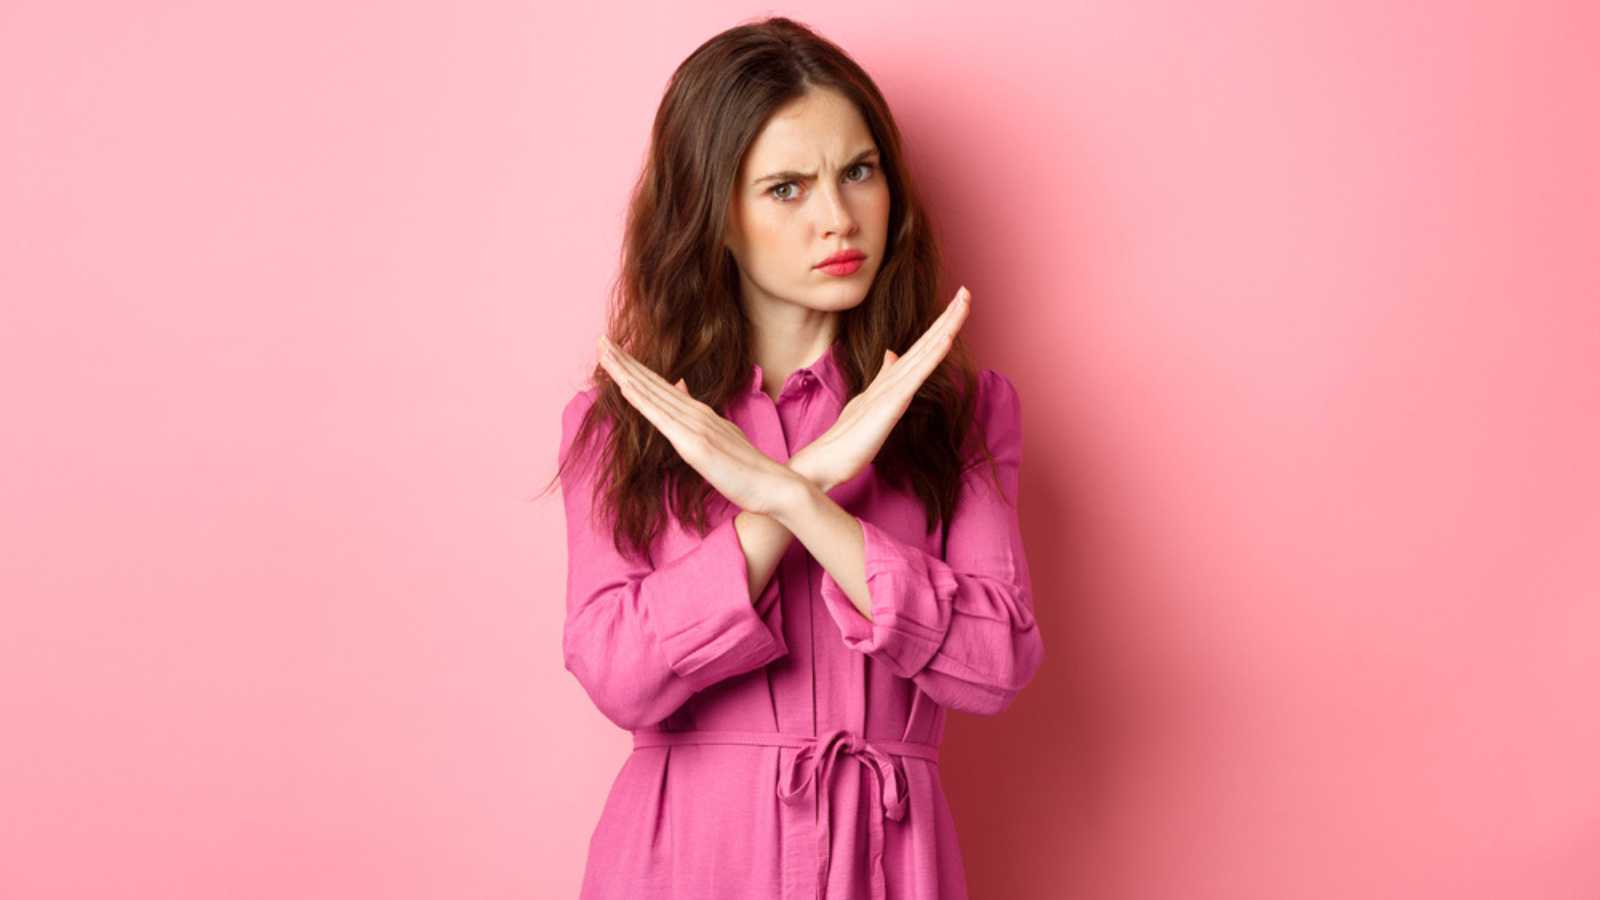 Displeased angry woman blocking offer, showing cross stop gesture, saying no and shaking head in negative reply, standing over pink background